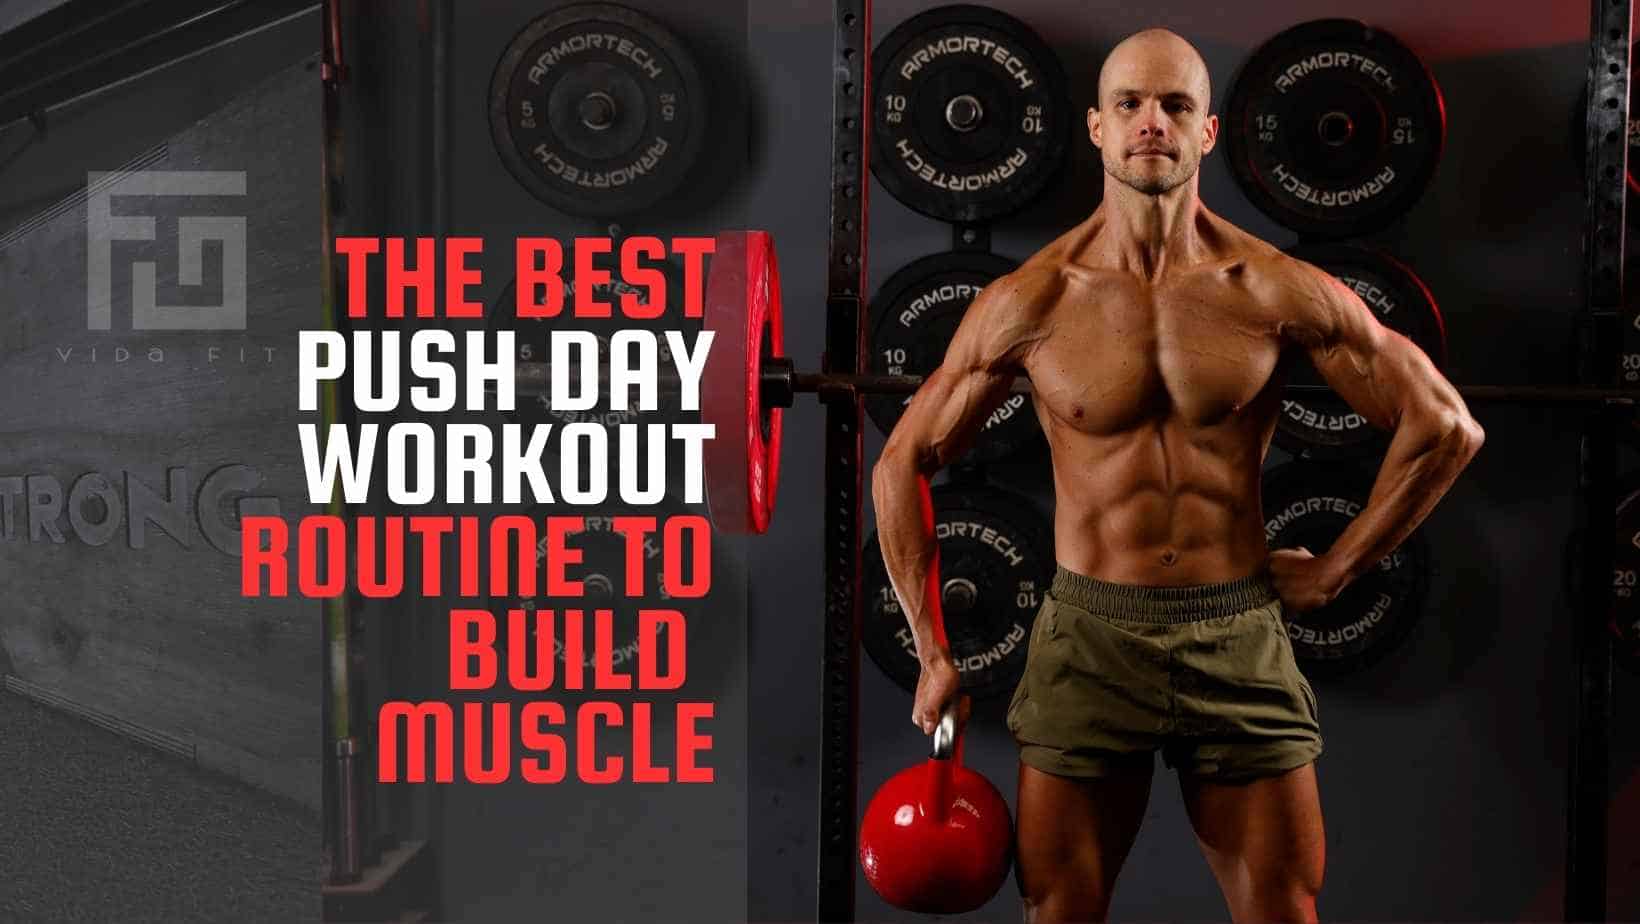 Push Day Workout Routine to Build Muscle